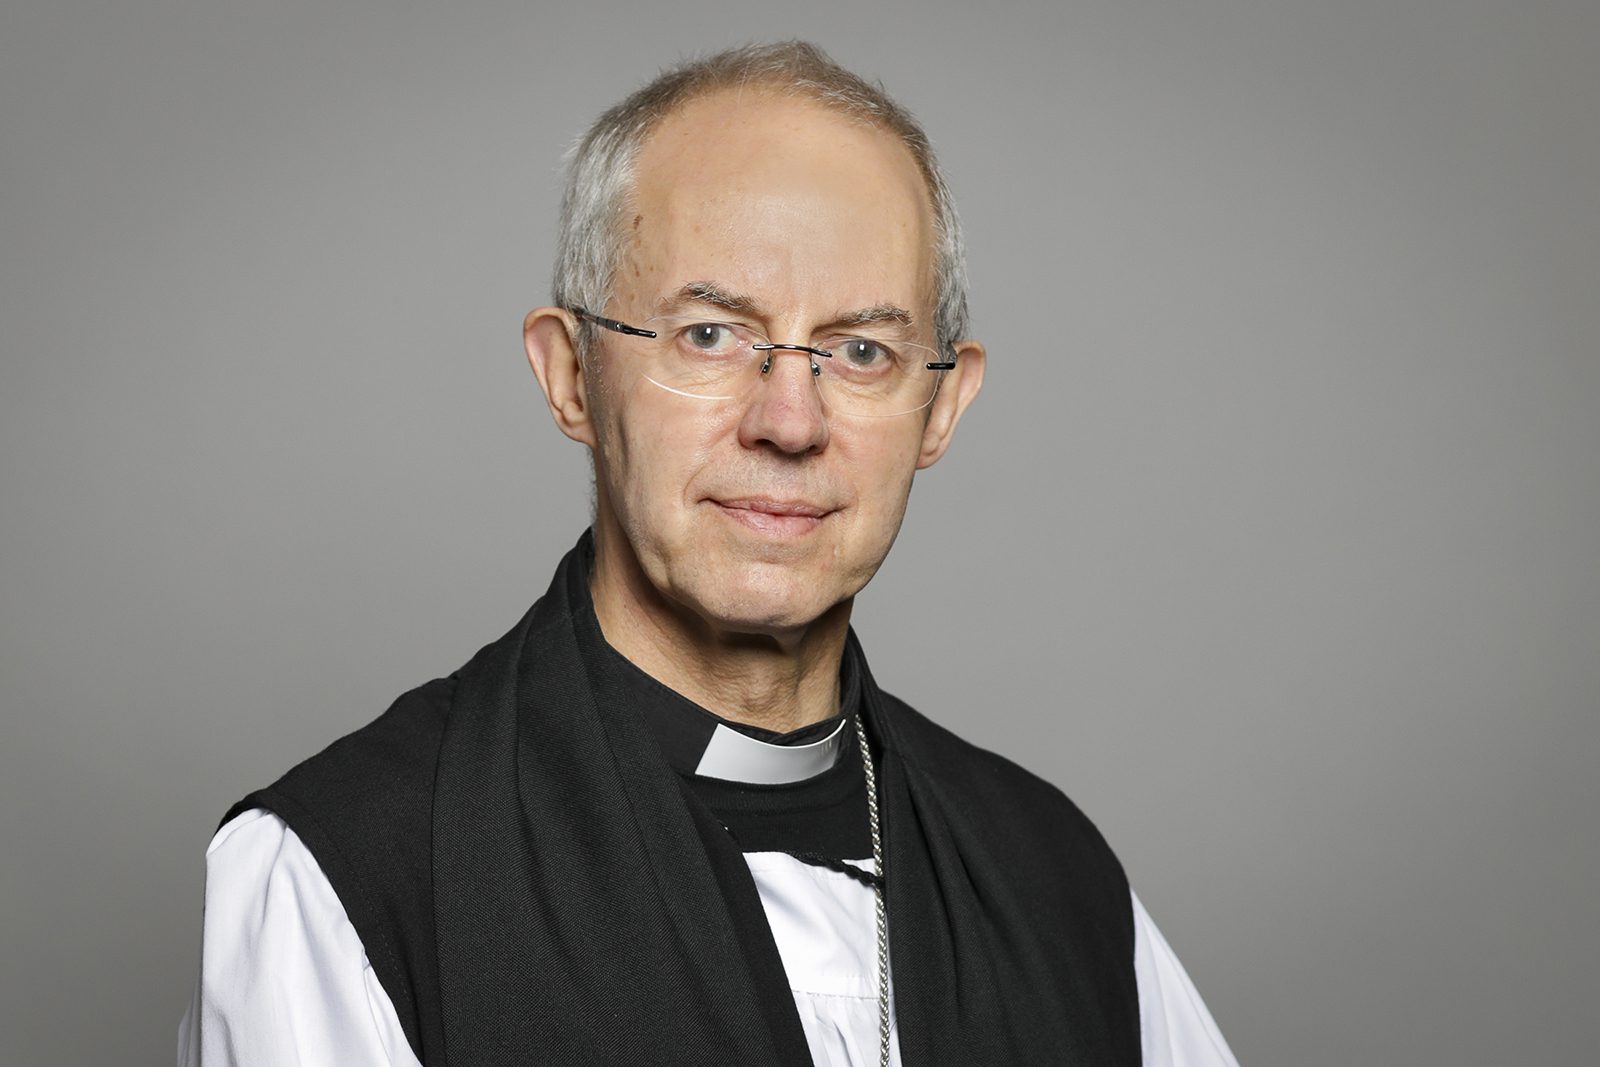 Official portrait of the Rev. Justin Welby, the Lord Archbishop of Canterbury. Photo by Roger Harris/UK Parliament/Creative Commons